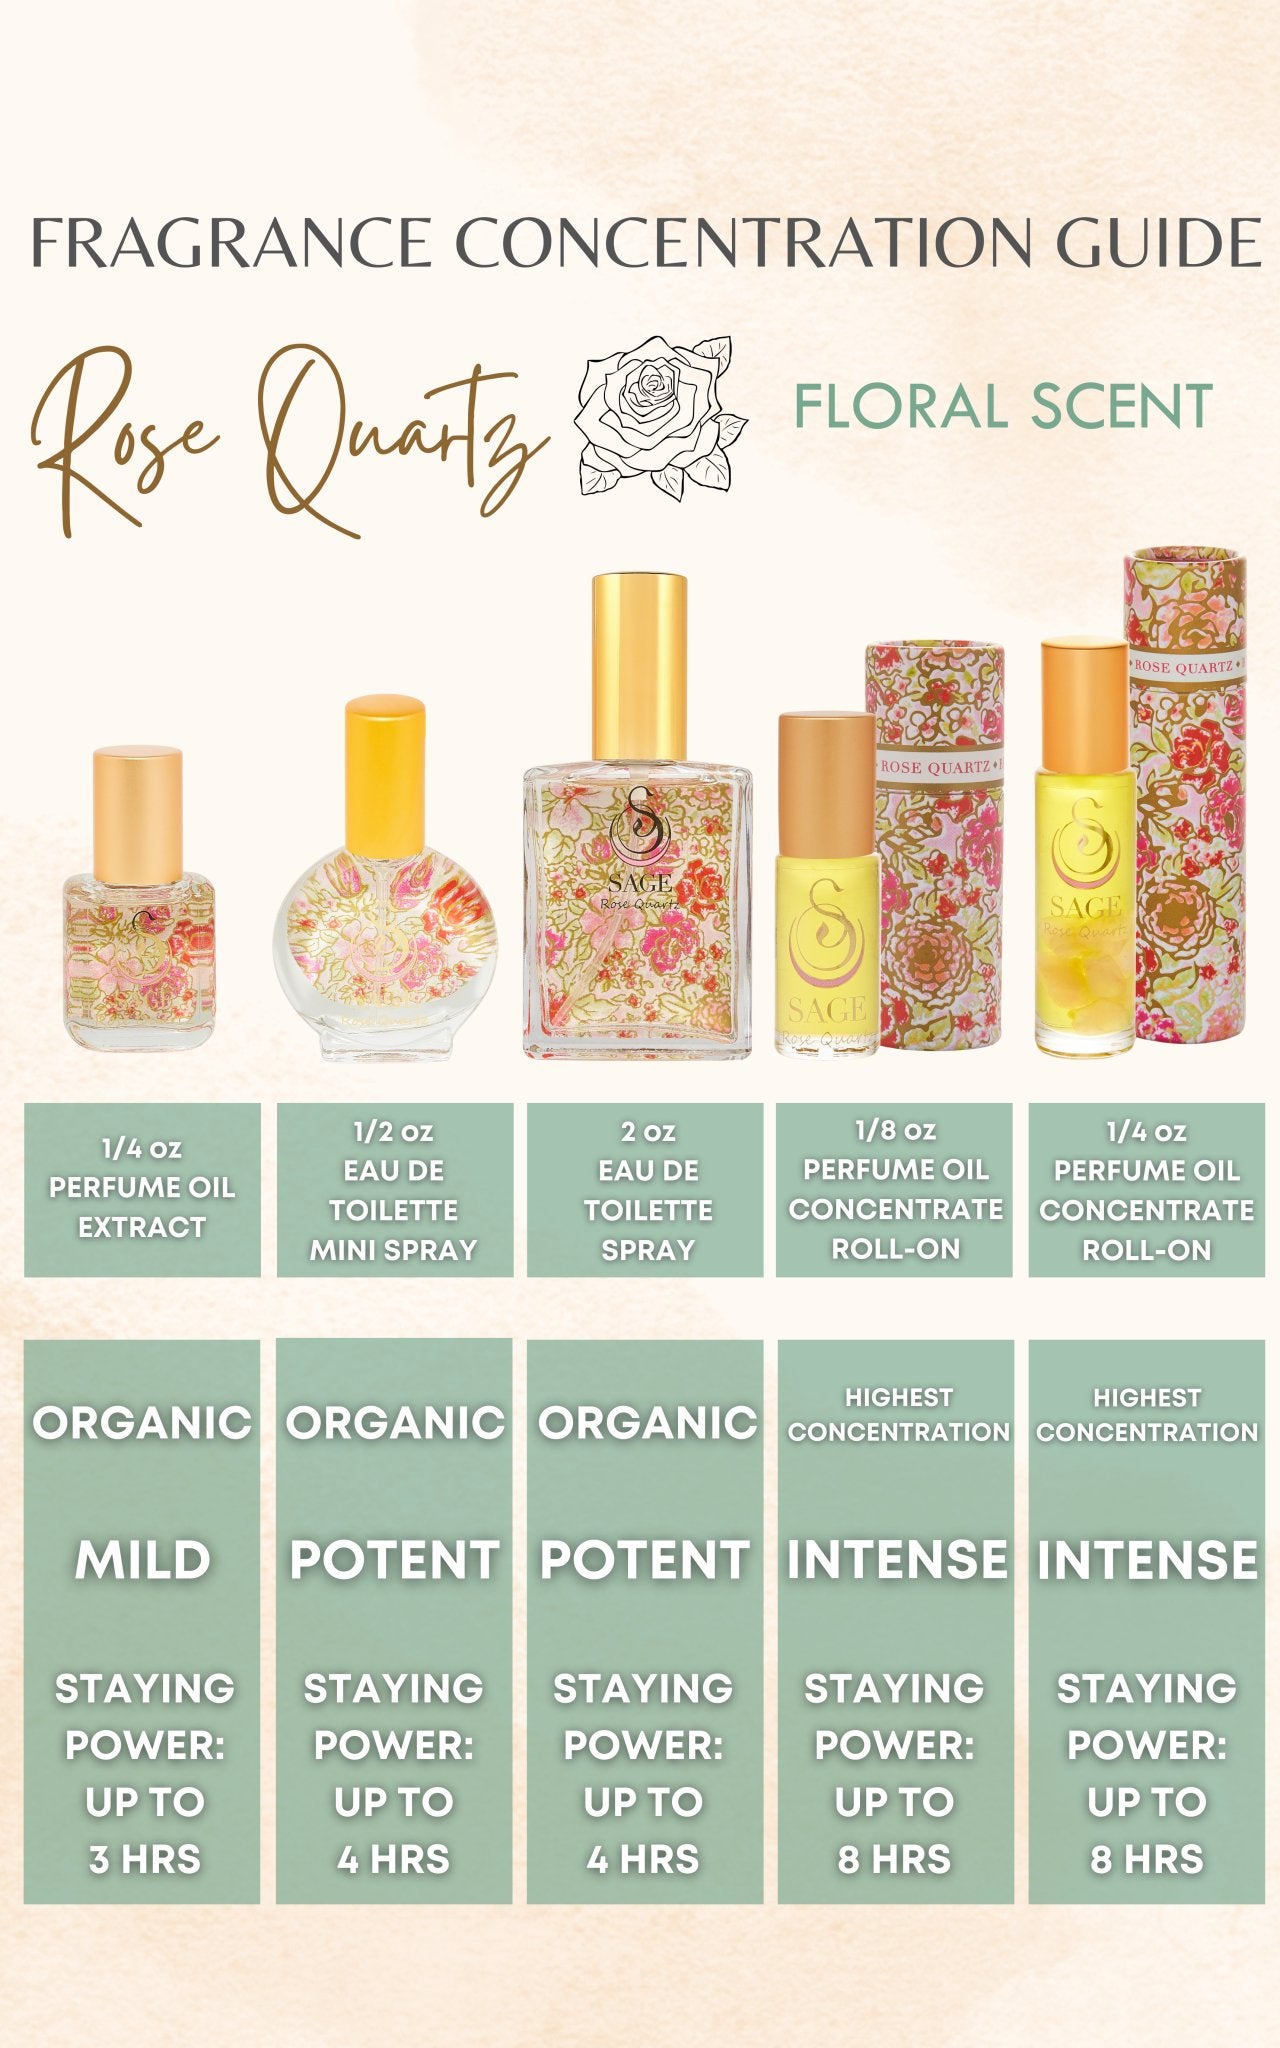 Rose Quartz Organic 1/4 oz Perfume Oil Extract Roll-On by Sage - The Sage Lifestyle